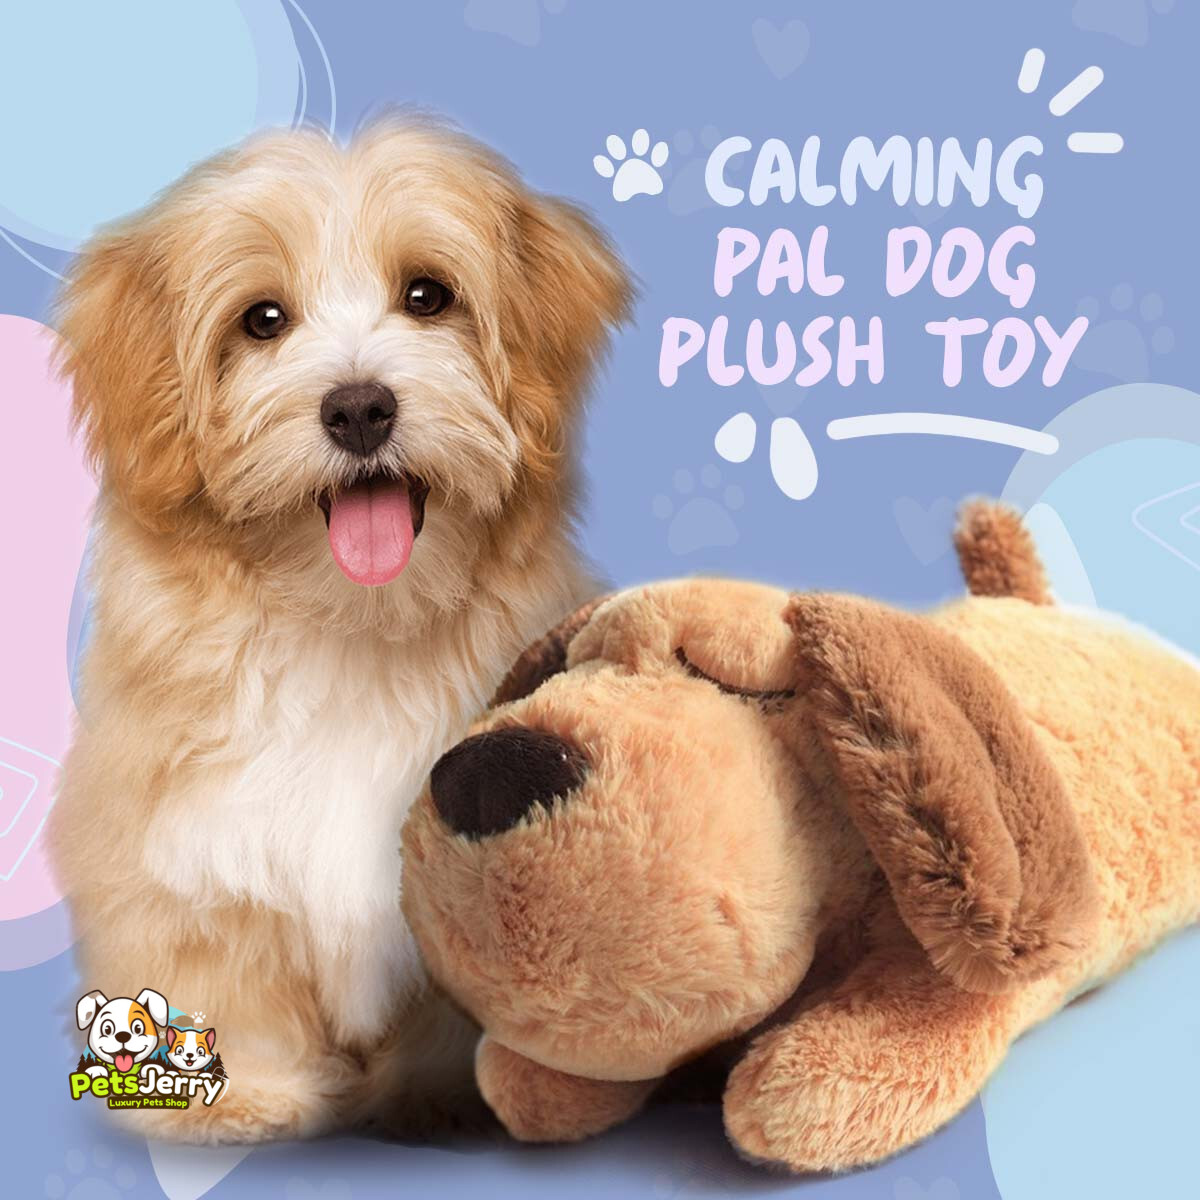 Calming Pal Dog Friend Plush Toy | Soothes Anxious Dogs | Mimics Mom's Heartbeat